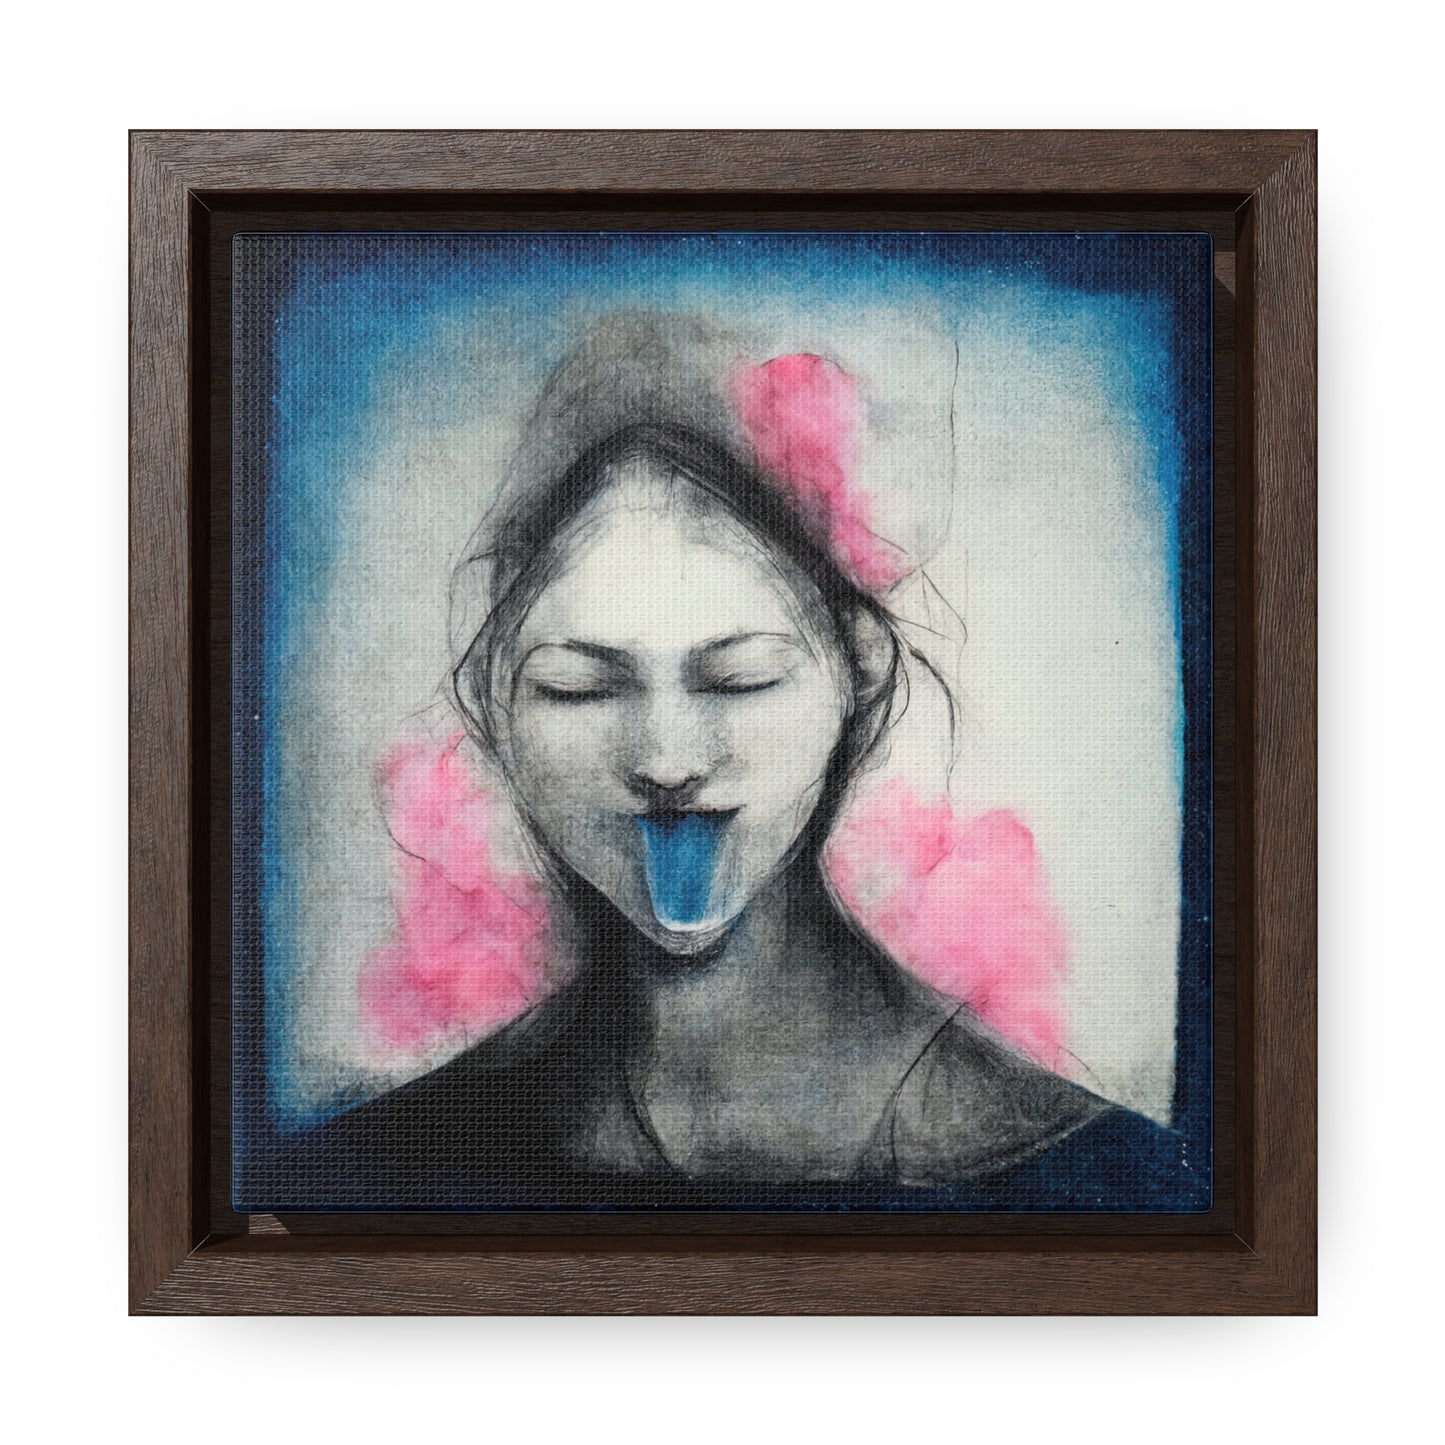 Girls from Mars 3, Valentinii, Gallery Canvas Wraps, Square Frame